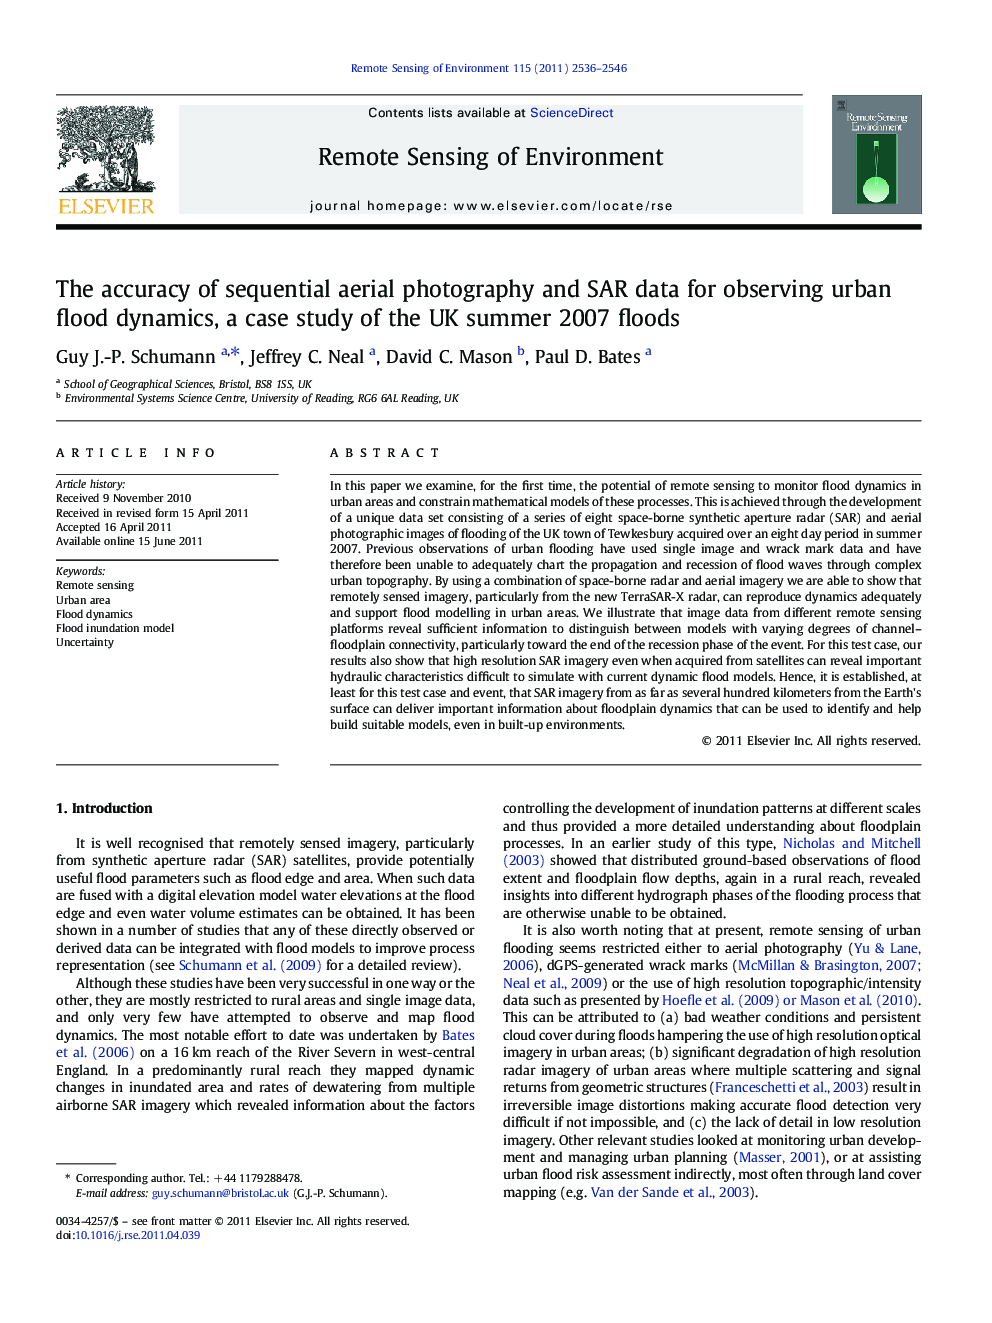 The accuracy of sequential aerial photography and SAR data for observing urban flood dynamics, a case study of the UK summer 2007 floods